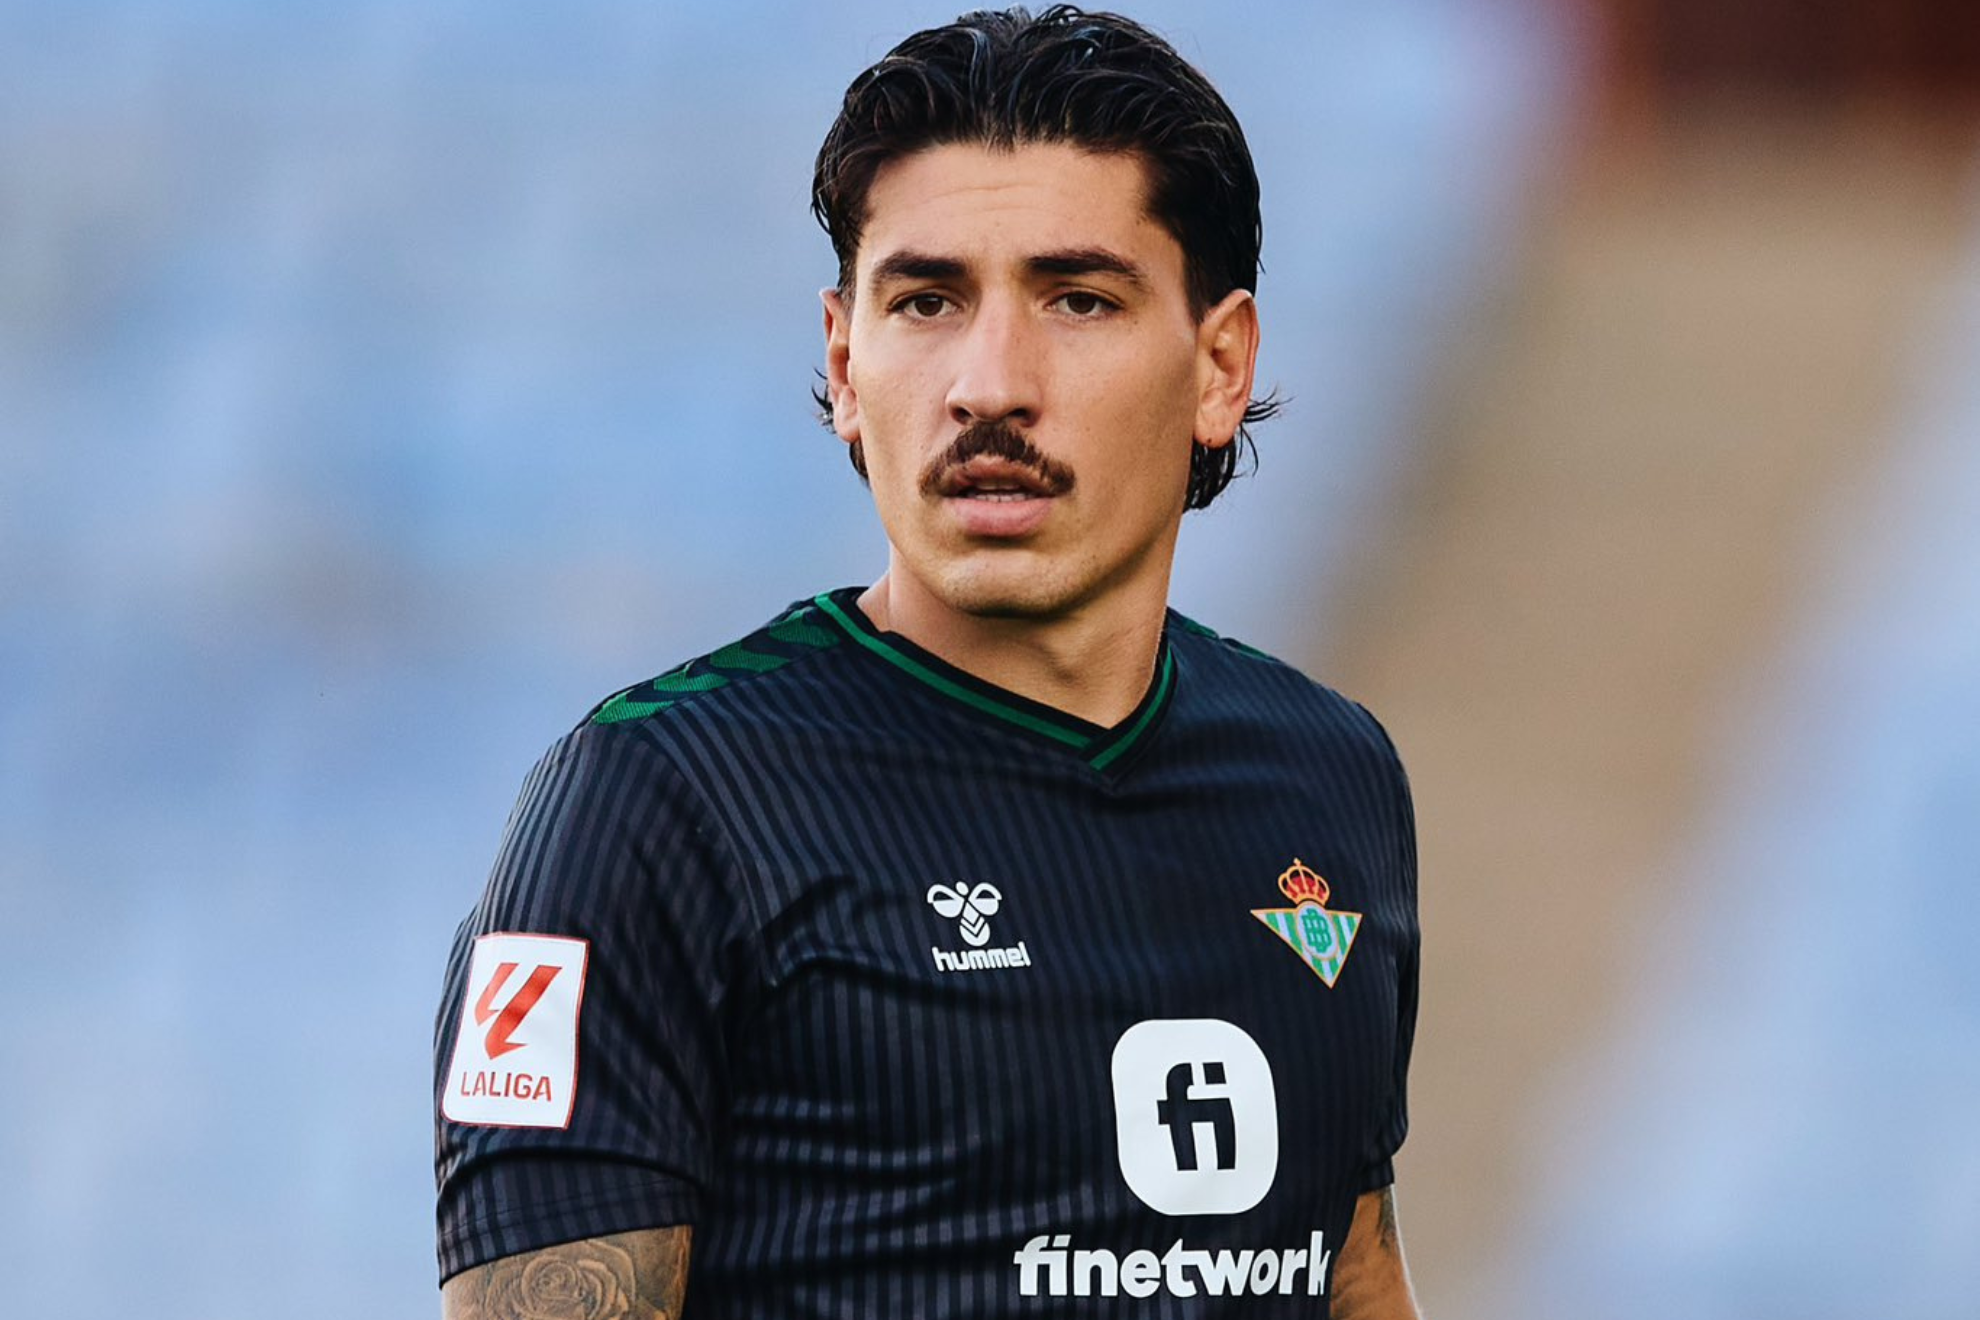 Bellerin said Friday he would love to end his career as a Verdiblanco.